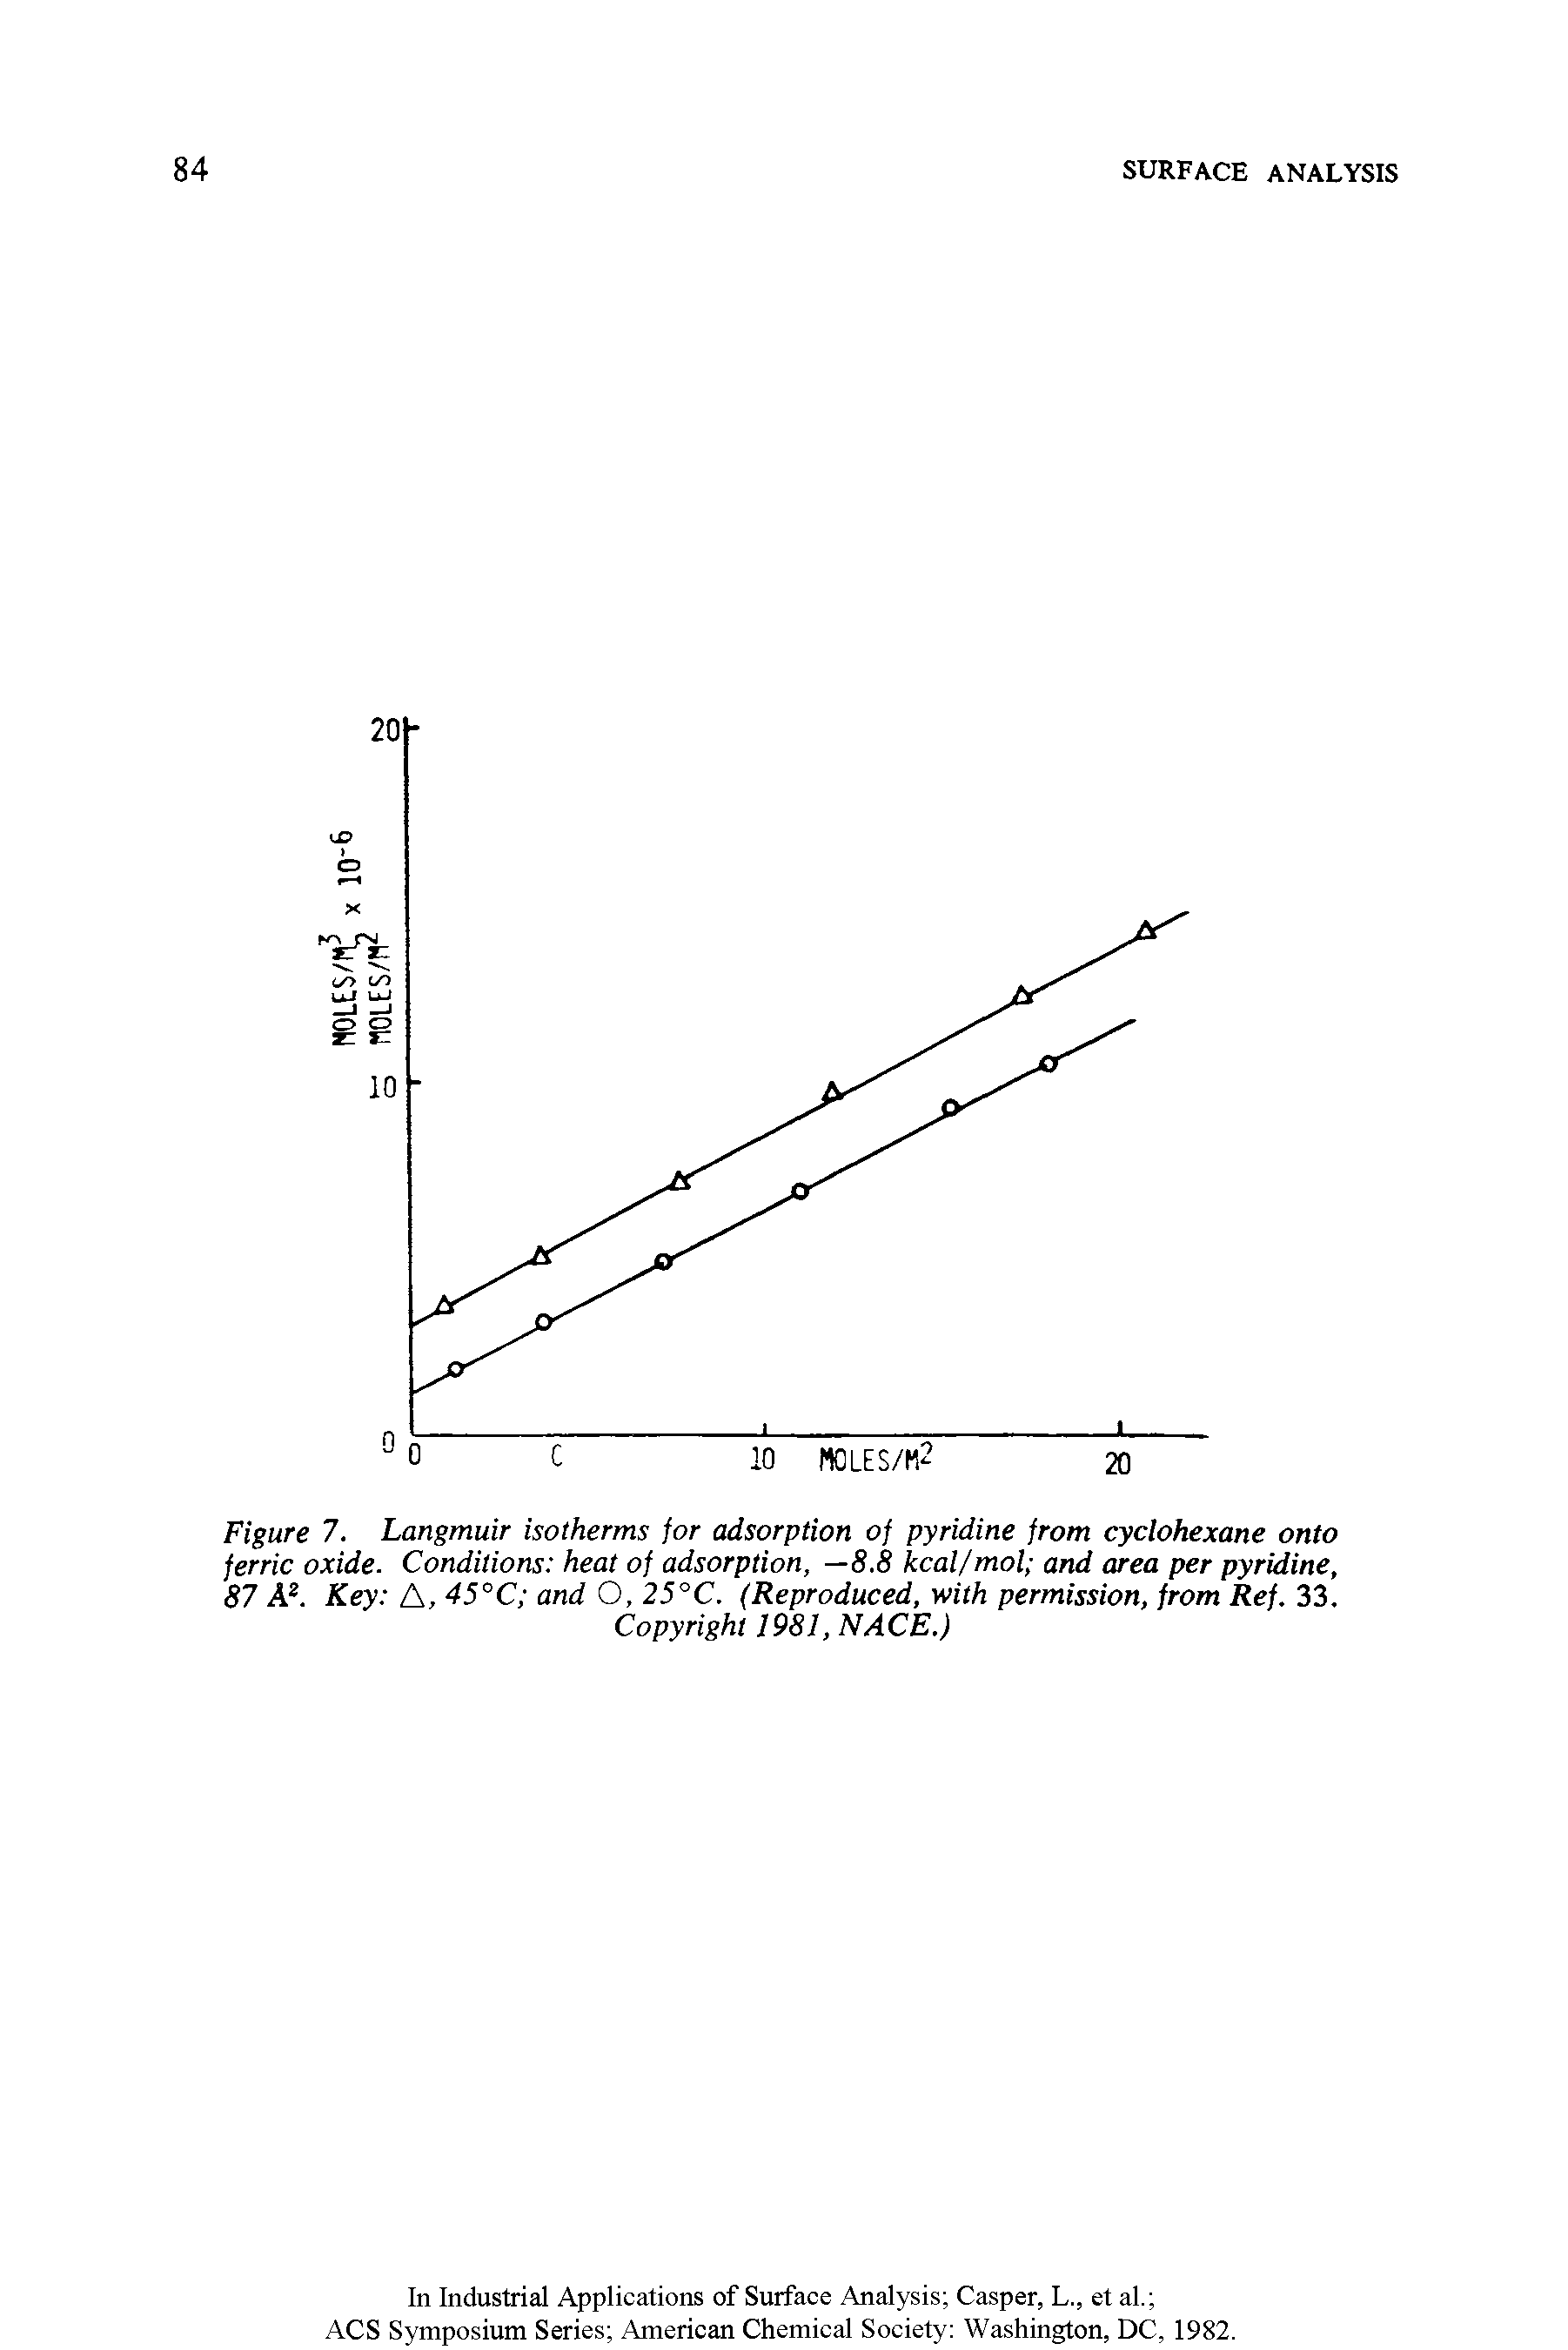 Figure 7. Langmuir isotherms for adsorption of pyridine from cyclohexane onto ferric oxide. Conditions heat of adsorption, —8.8 kcal/mol and area per pyridine, 87 A2. Key A, 45°C and O, 25°C. (Reproduced, with permission, from Ref. 33. Copyright 1981, NACE.)...